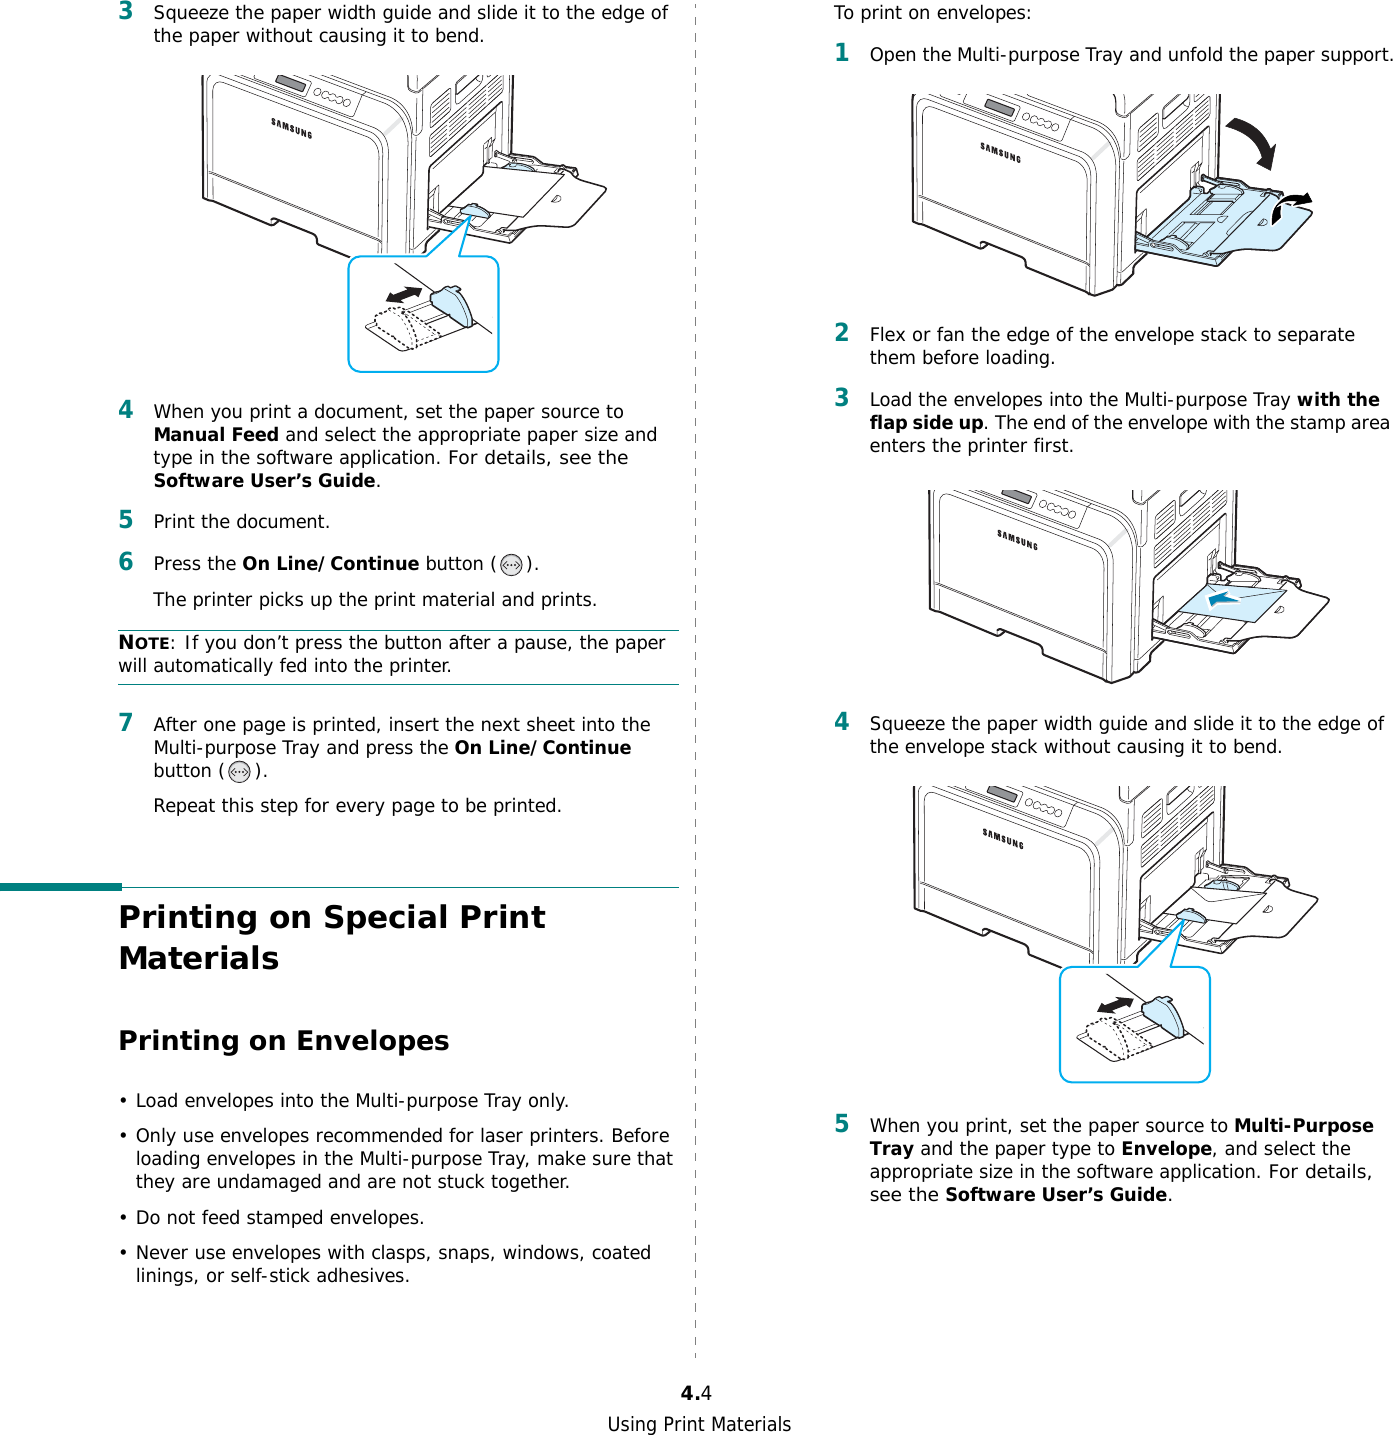 Using Print Materials4.43Squeeze the paper width guide and slide it to the edge of the paper without causing it to bend.4When you print a document, set the paper source to Manual Feed and select the appropriate paper size and type in the software application. For details, see the Software User’s Guide. 5Print the document. 6Press the On Line/Continue button ( ). The printer picks up the print material and prints.NOTE: If you don’t press the button after a pause, the paper will automatically fed into the printer.7After one page is printed, insert the next sheet into the Multi-purpose Tray and press the On Line/Continue button ( ).Repeat this step for every page to be printed.Printing on Special Print MaterialsPrinting on Envelopes• Load envelopes into the Multi-purpose Tray only.• Only use envelopes recommended for laser printers. Before loading envelopes in the Multi-purpose Tray, make sure that they are undamaged and are not stuck together. • Do not feed stamped envelopes.• Never use envelopes with clasps, snaps, windows, coated linings, or self-stick adhesives. To print on envelopes:1Open the Multi-purpose Tray and unfold the paper support.2Flex or fan the edge of the envelope stack to separate them before loading.3Load the envelopes into the Multi-purpose Tray with the flap side up. The end of the envelope with the stamp area enters the printer first. 4Squeeze the paper width guide and slide it to the edge of the envelope stack without causing it to bend.5When you print, set the paper source to Multi-Purpose Tray and the paper type to Envelope, and select the appropriate size in the software application. For details, see the Software User’s Guide. 